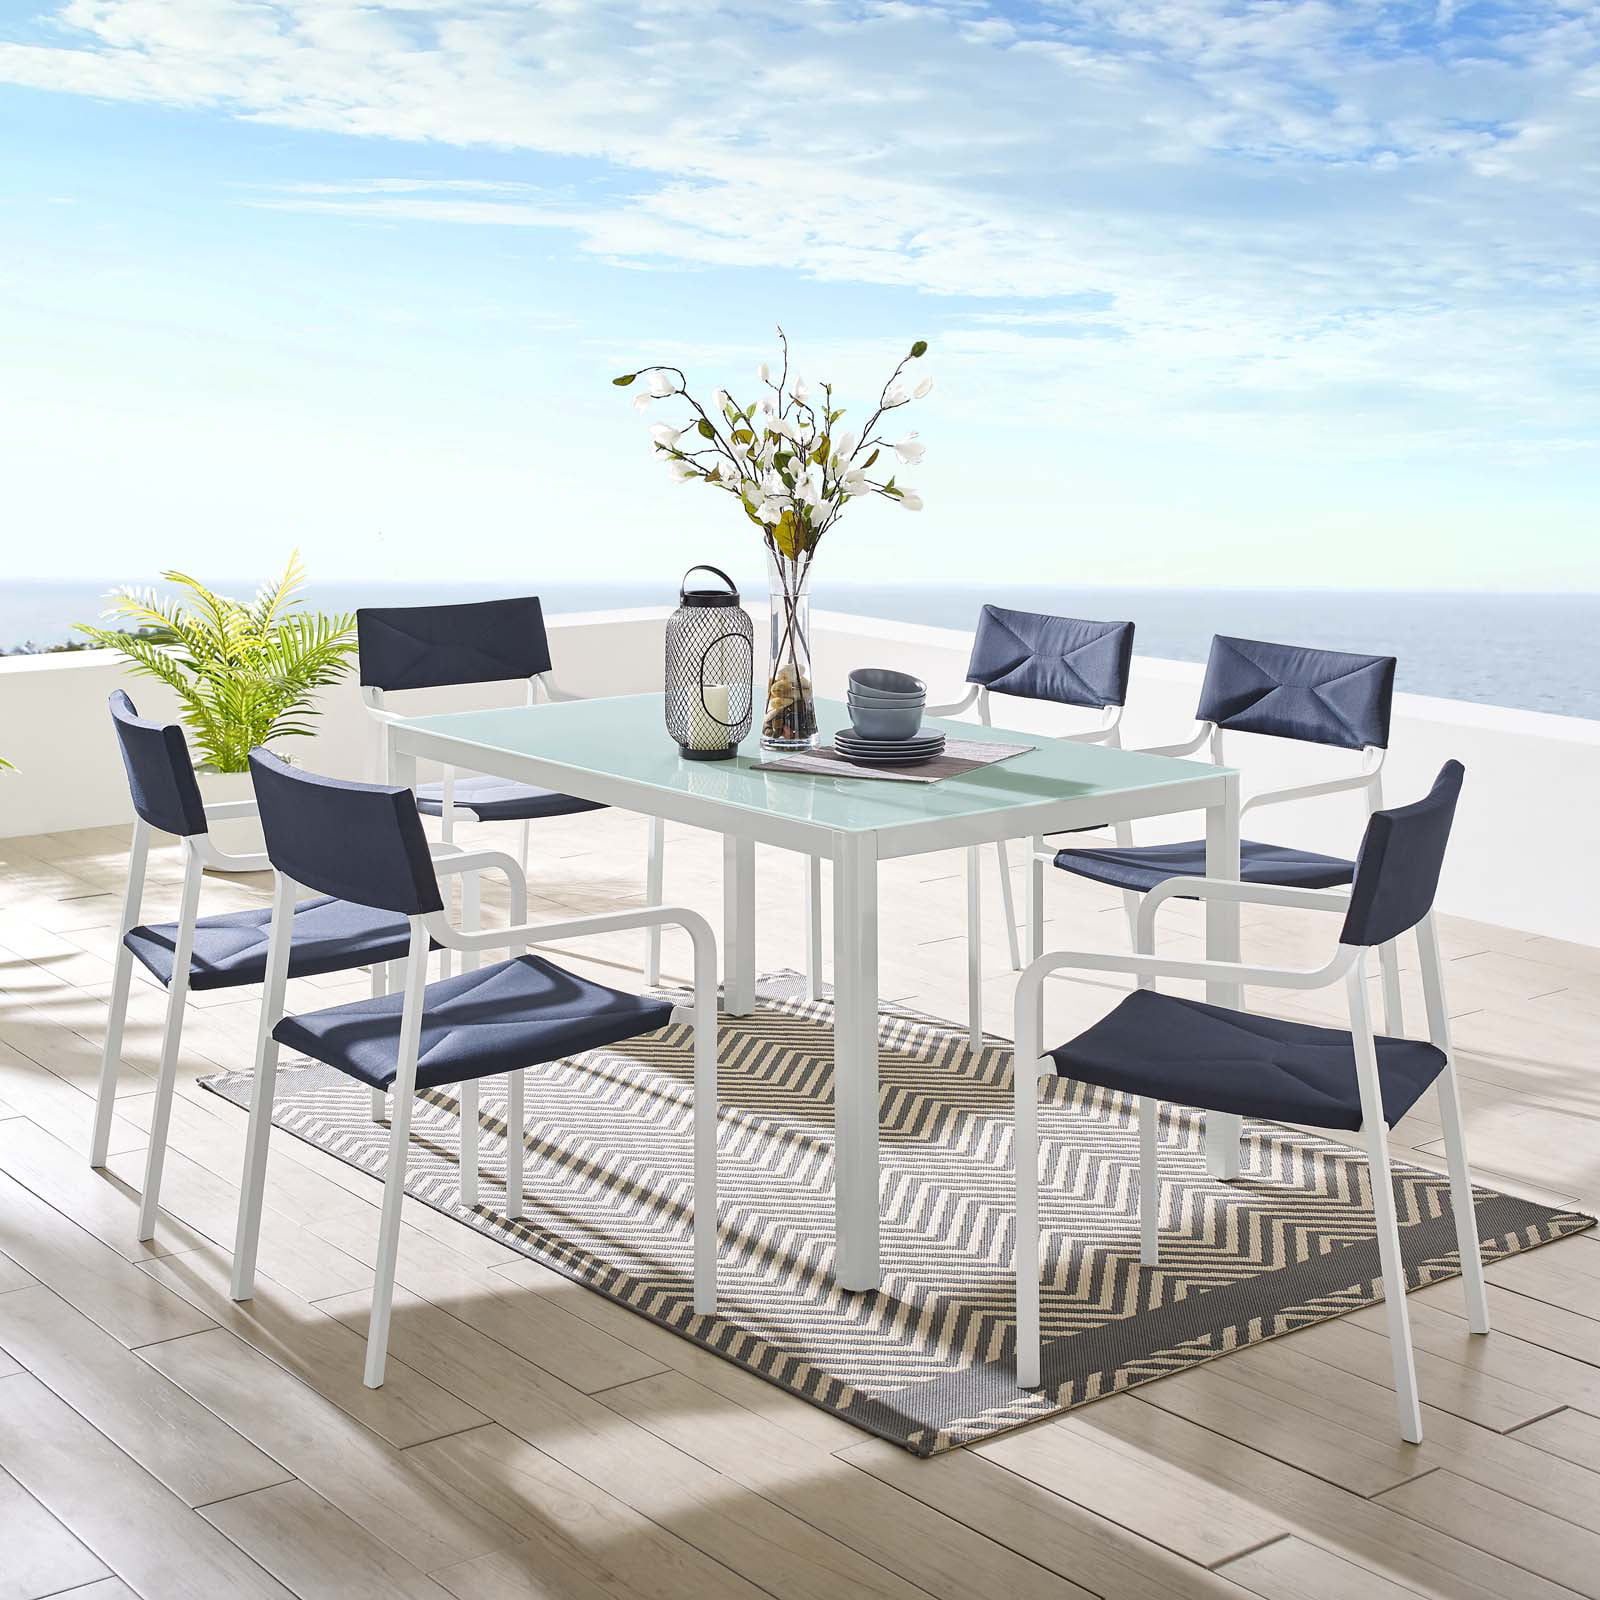 Raleigh Outdoor Patio Aluminum Dining Set with 6 Stackable Chairs in